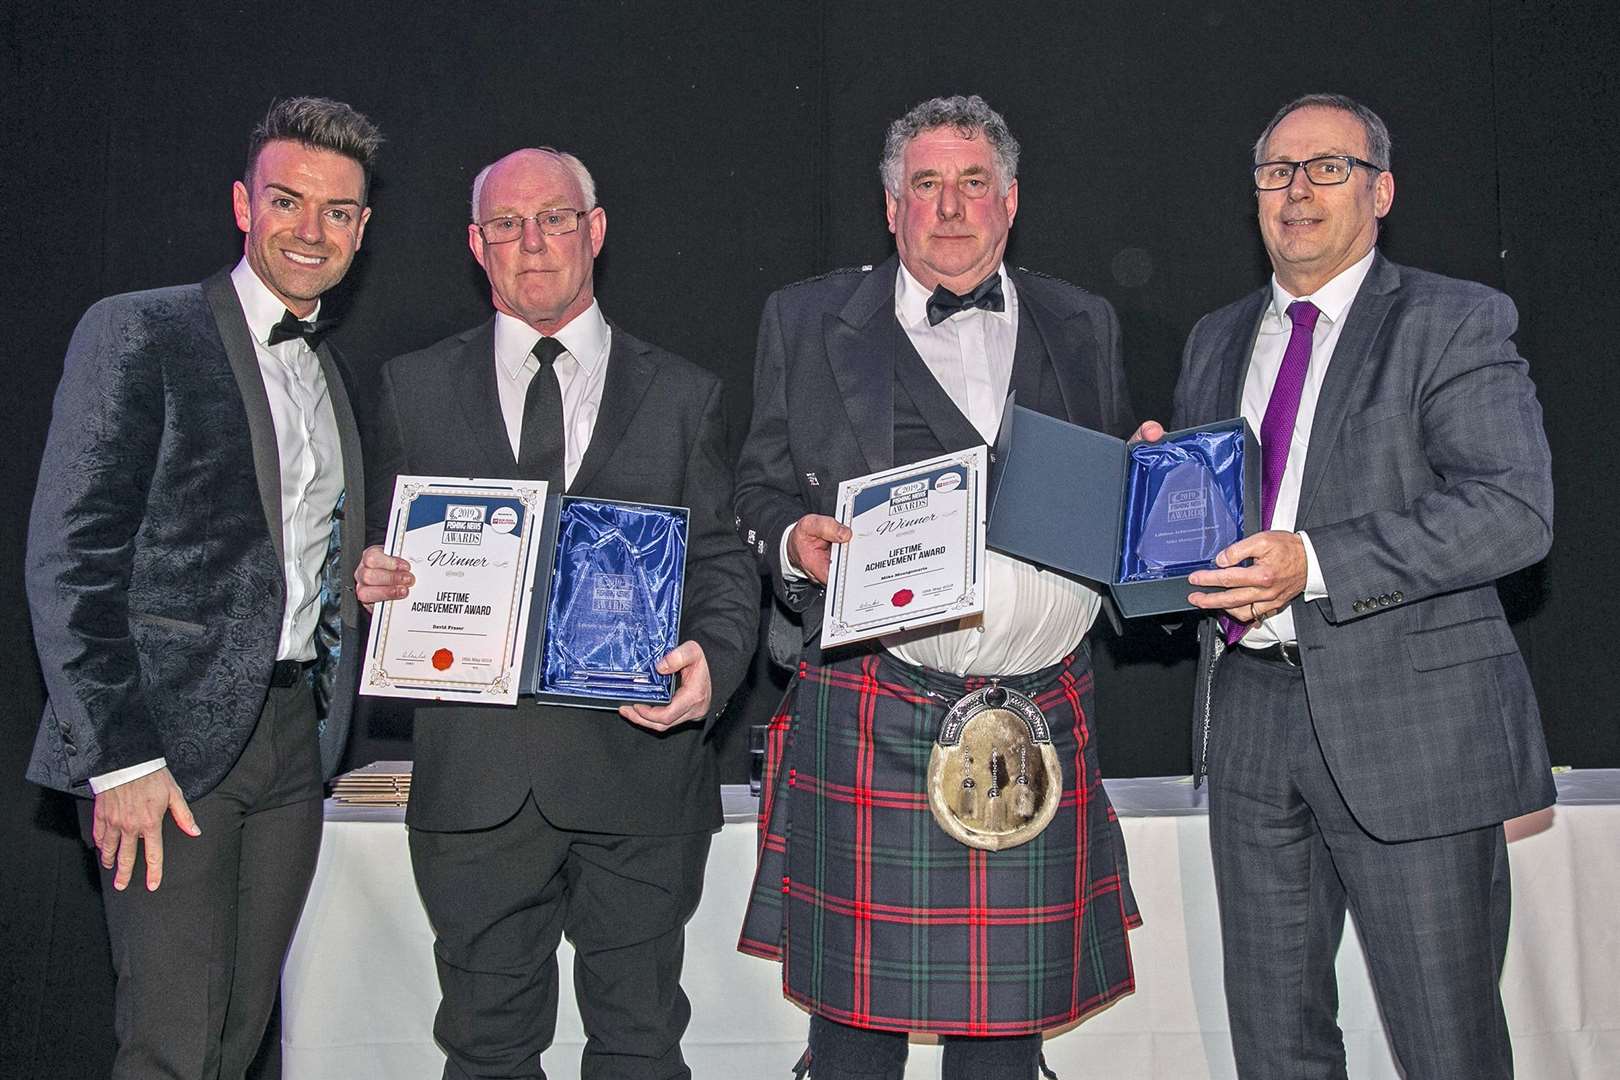 Left to right: Des Clarke, stand-up comedian and presenter who was hosting the awards, skipper David Fraser, joint winner Mike Montgomerie and Mike Park, chief executive of the Scottish White Fish Producers Association and managing director of Box Pool Solutions, the award sponsor.